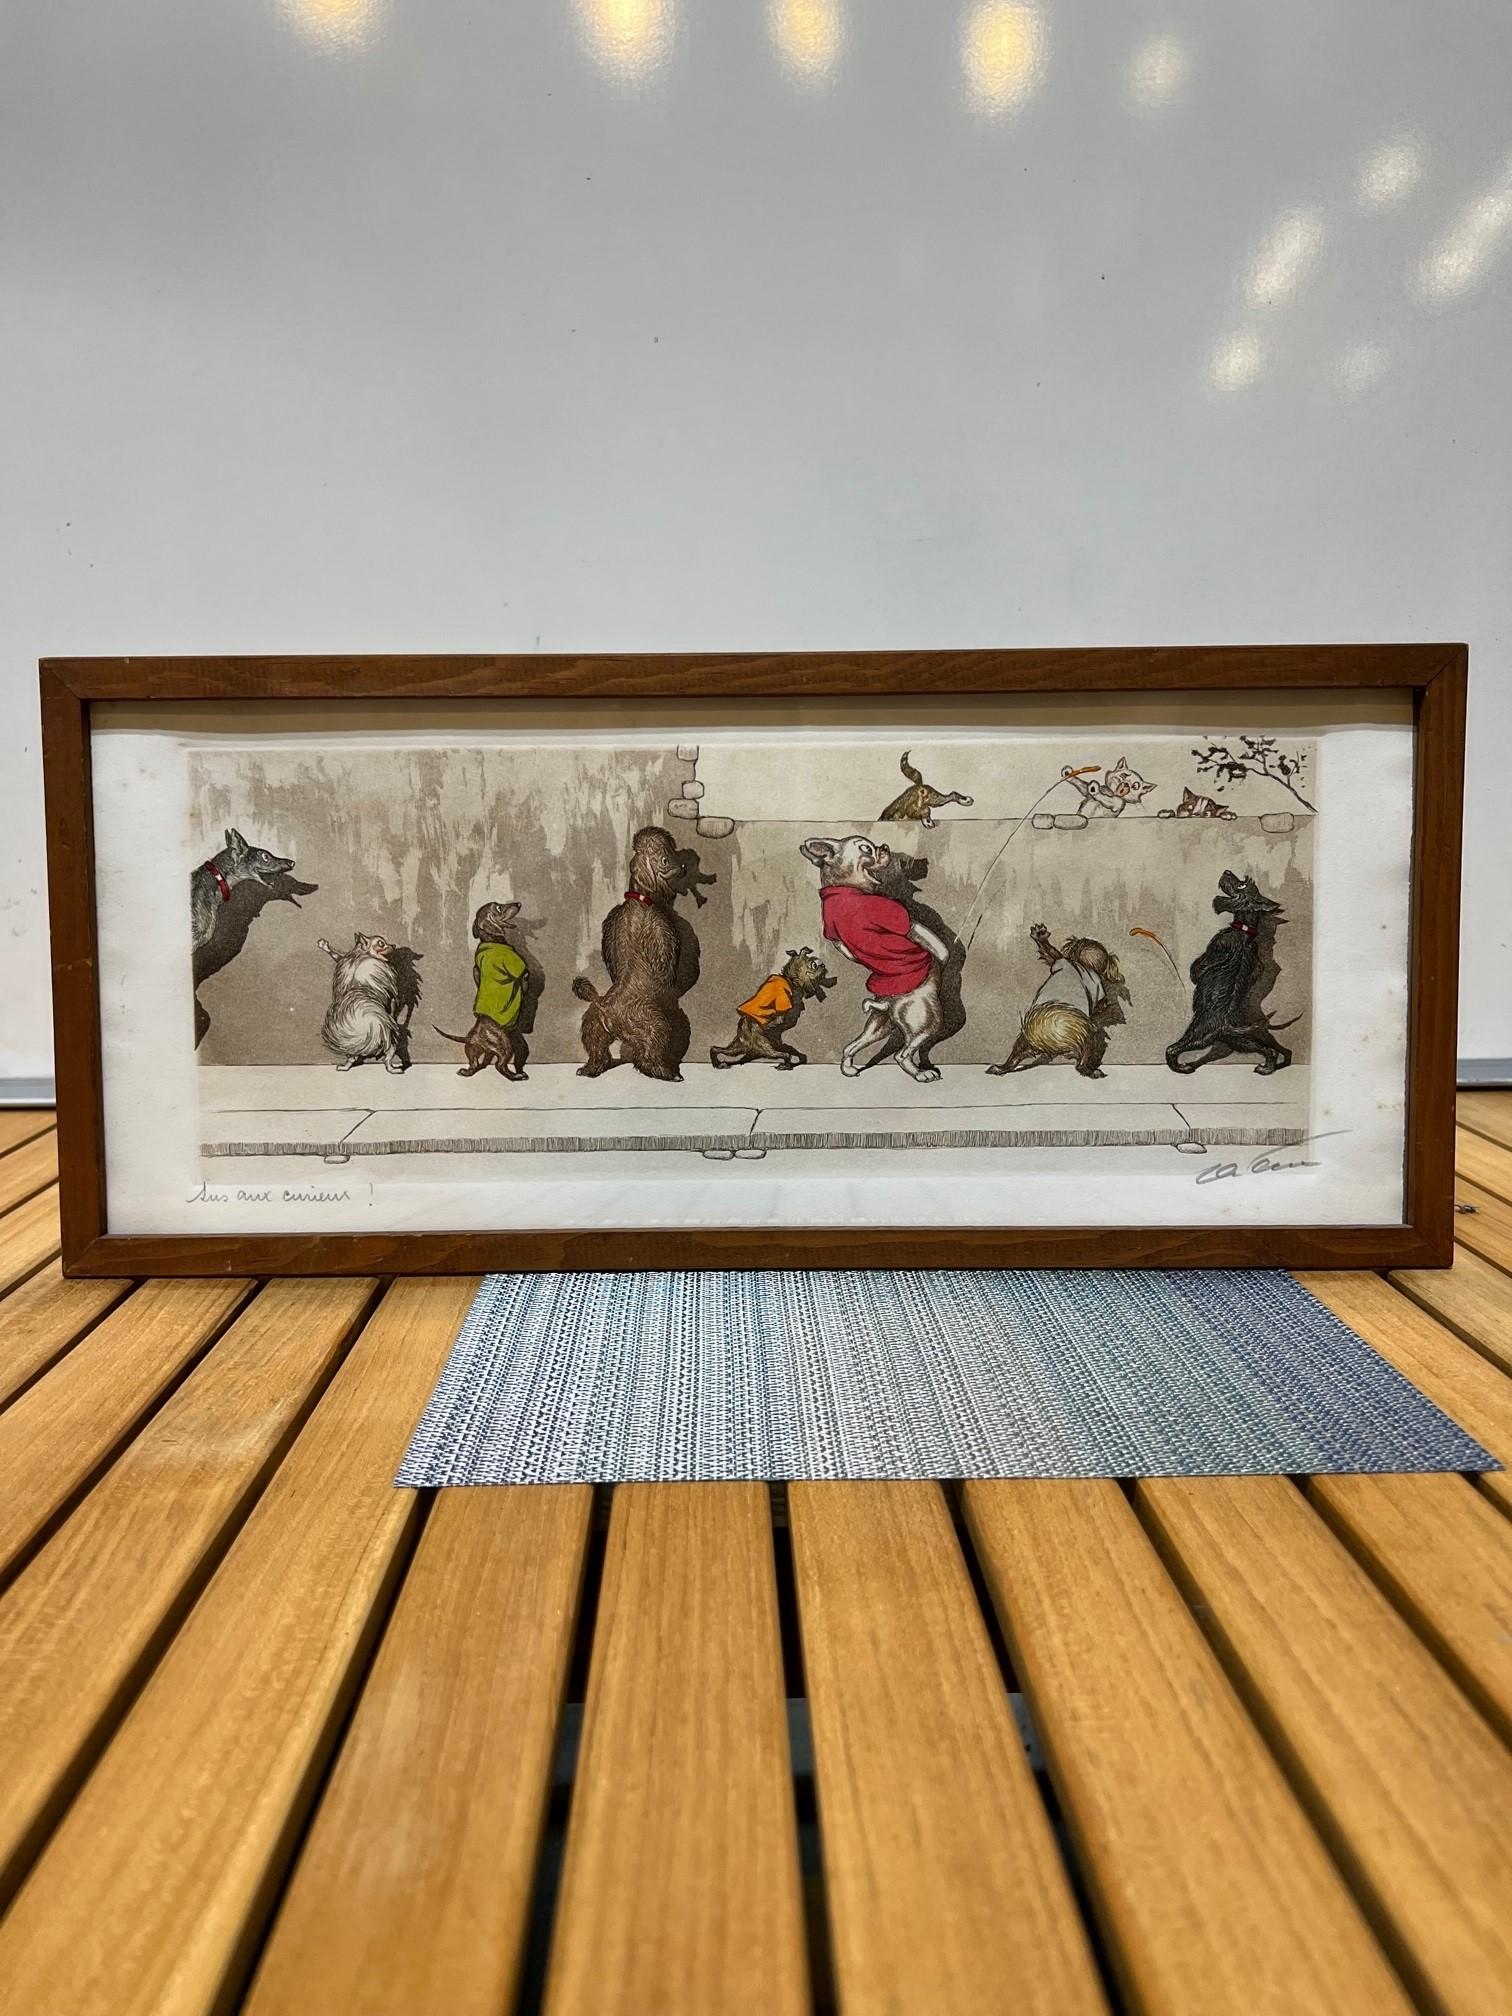 Original signed Boris O'Klein Dirty Dogs of Paris hand colored etching of a gang of dogs urinating on a brick wall, aiming at several cats on top of the wall. Signed by the artist in pencil lower right and titled lower left 